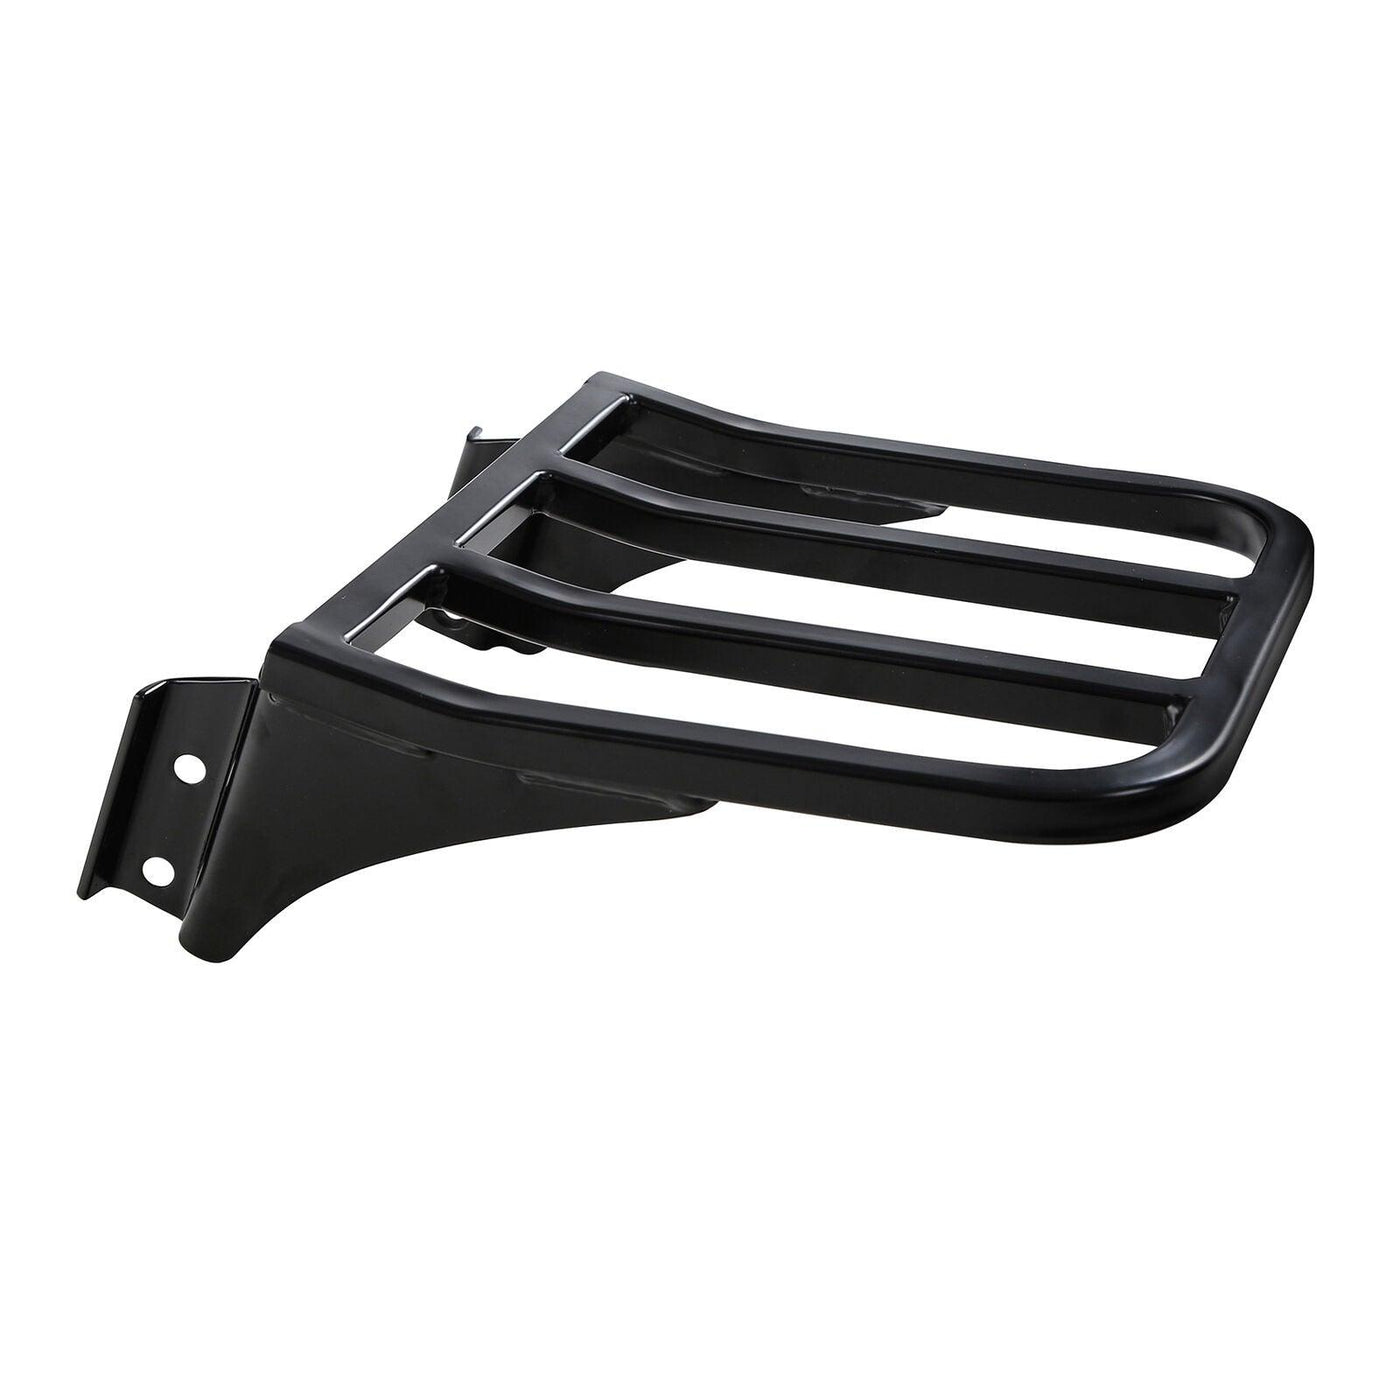 Detachable Rear Backrest Luggage Rack Fit For Harley Dyna FXD FXDB FXDL 2006-UP - Moto Life Products